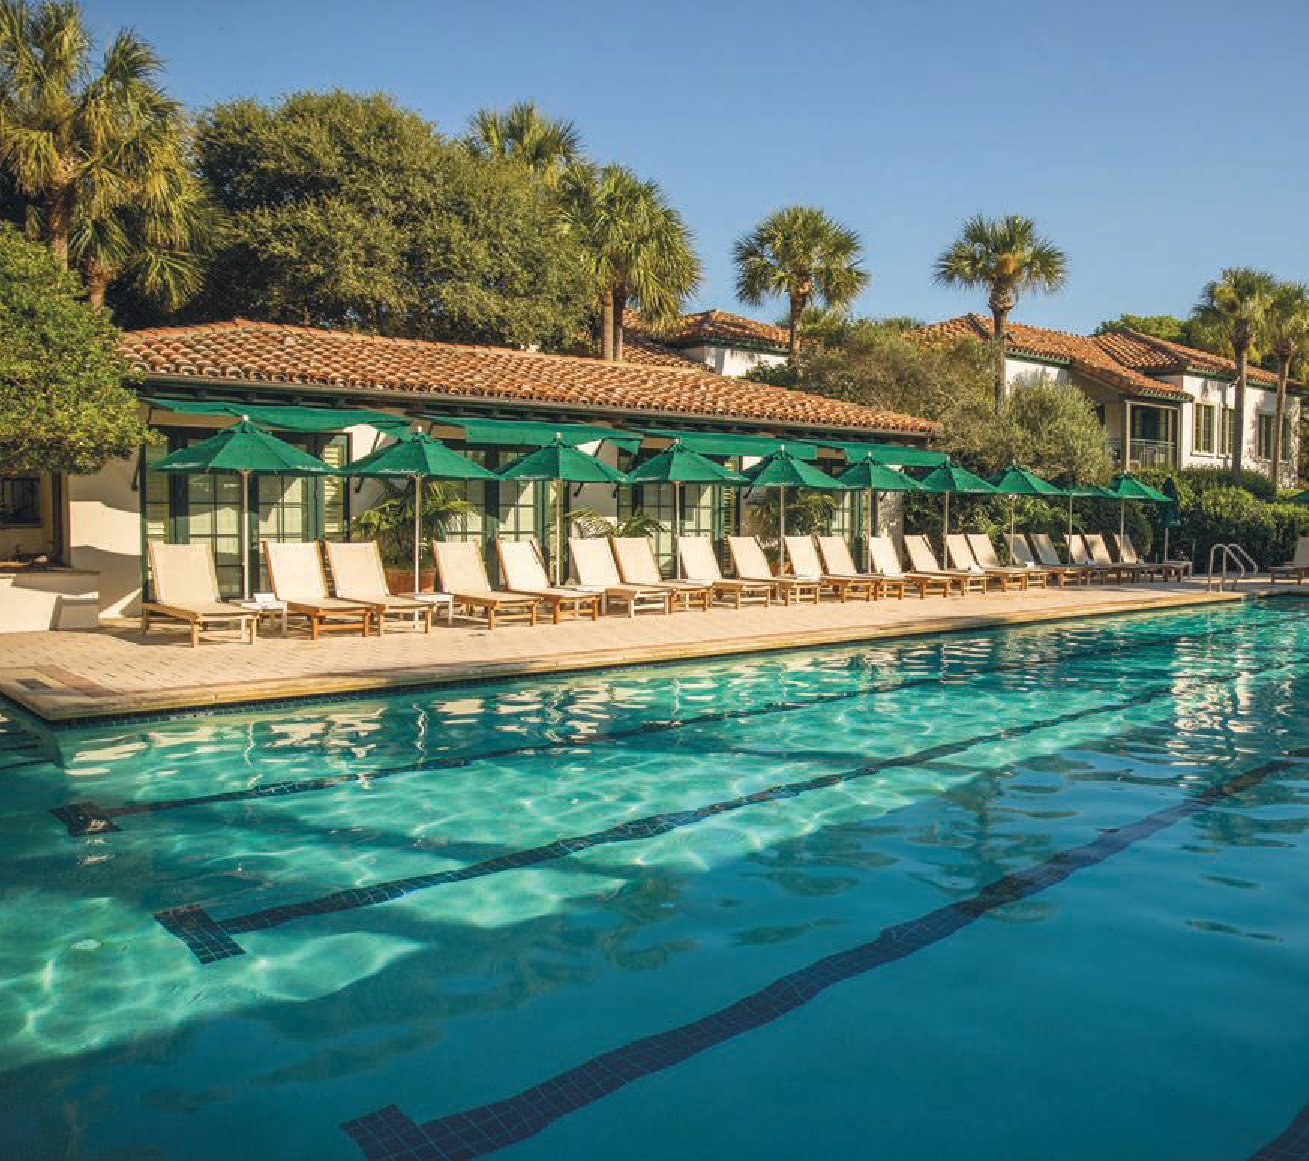 Sea Island Club members have access to three swimming pools and 5 miles of pristine beach PHOTO COURTESY OF THE RESERVE AT SEA ISLAND